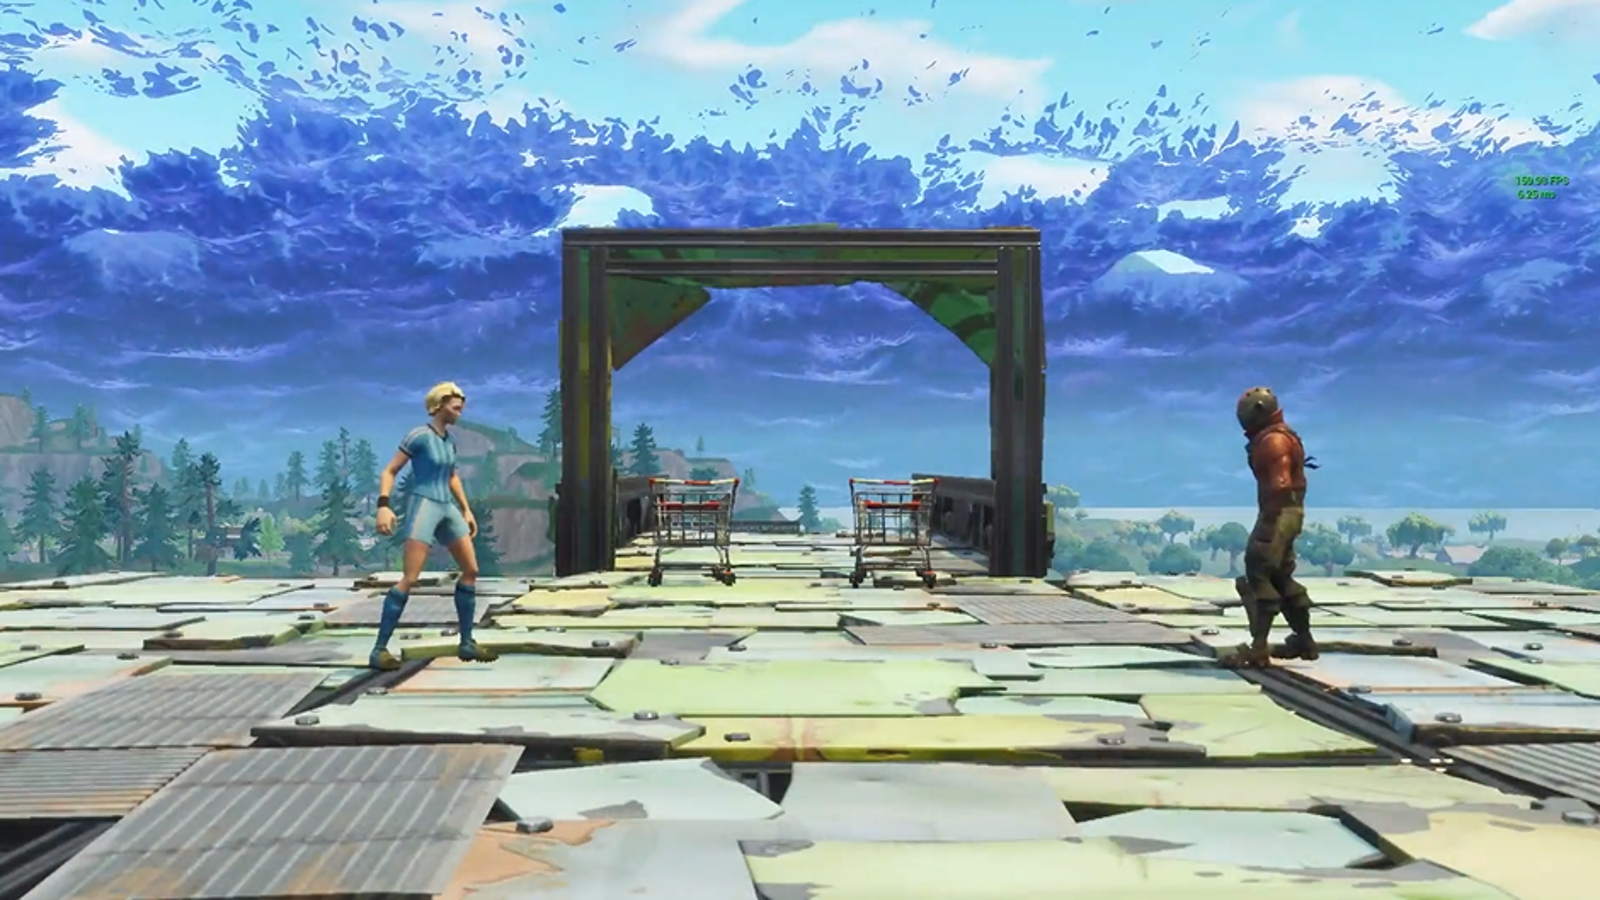 Player Makes Mario Kart-Style Racetrack In Fortnite - 1600 x 900 png 2163kB